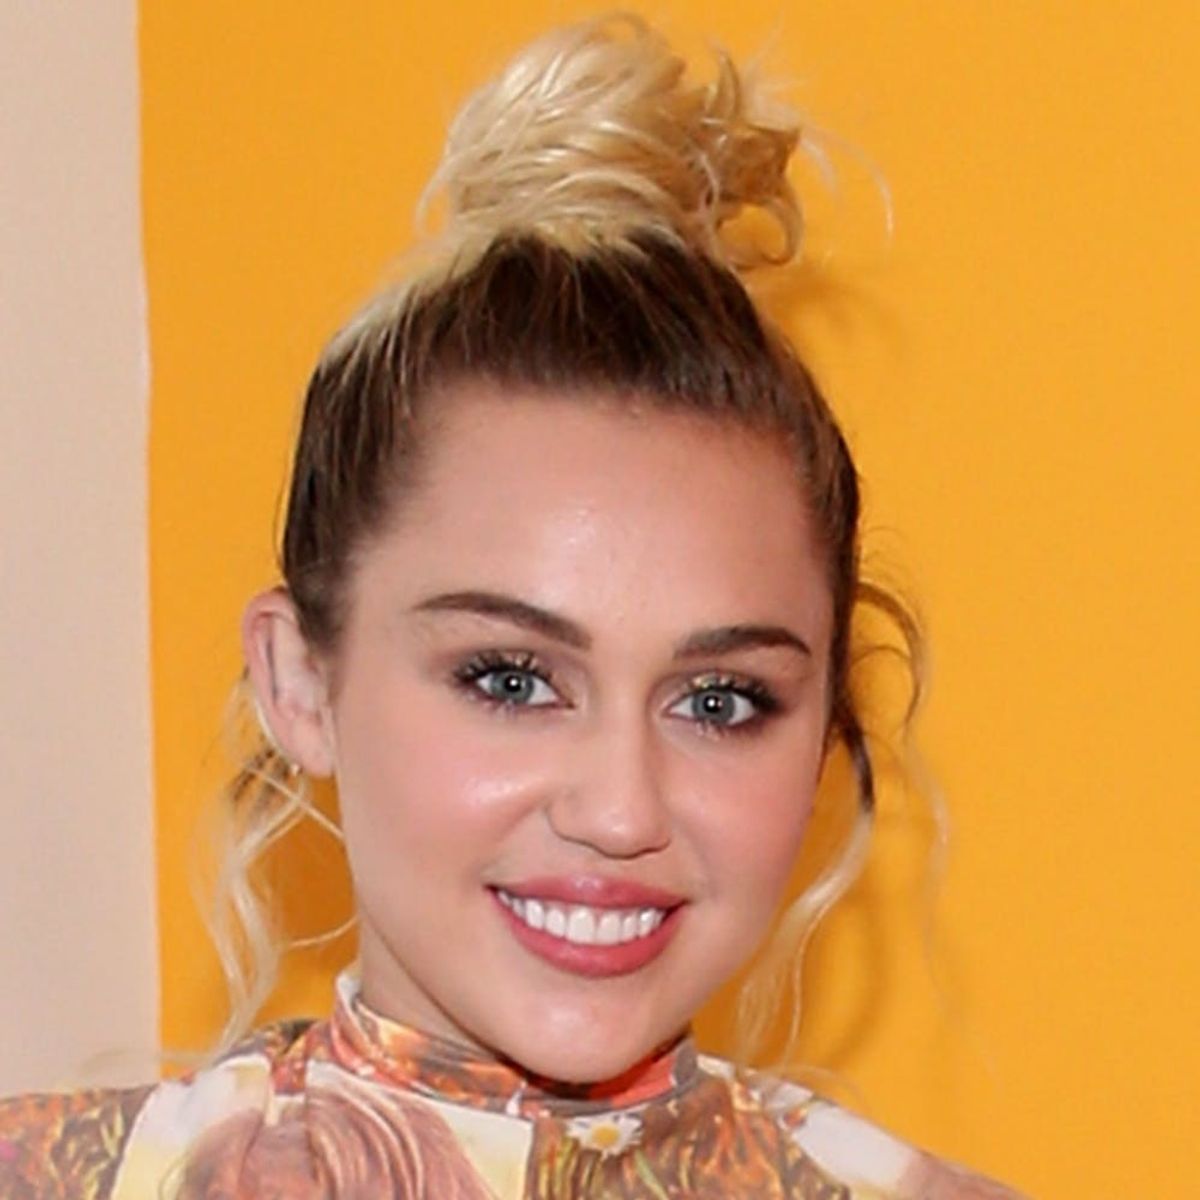 Miley Cyrus Got an Adorable Tiny Tattoo of Her Dog